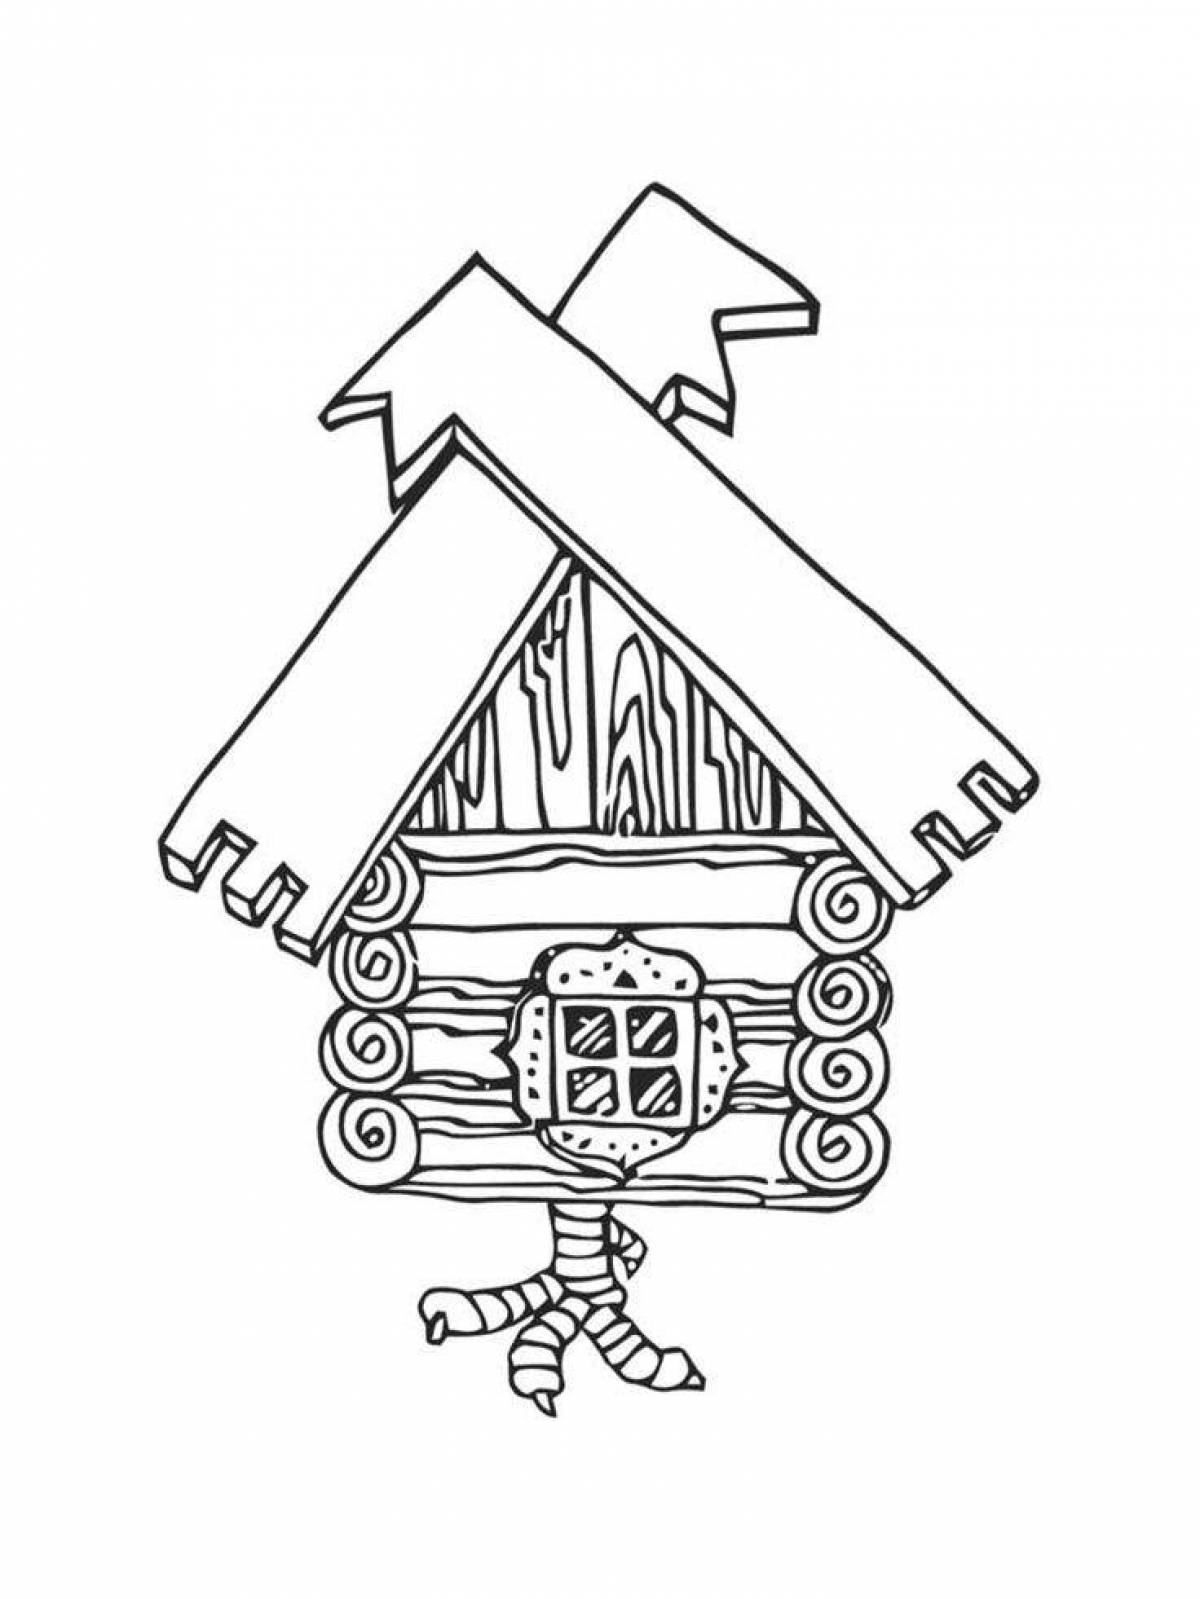 Exalted hut coloring page